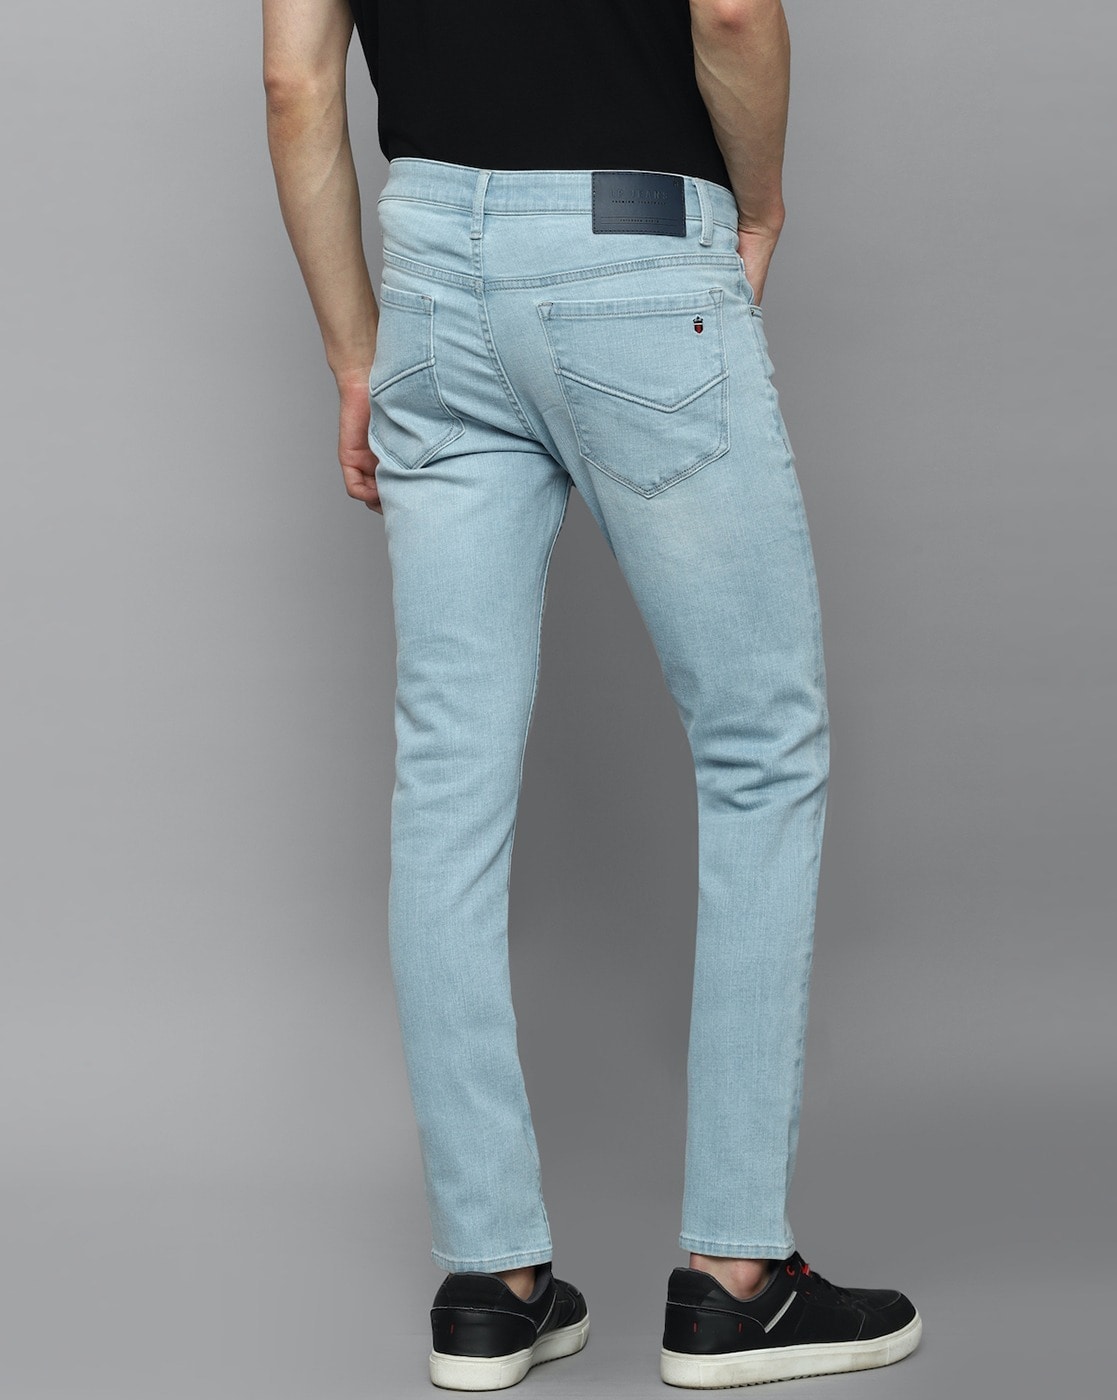 Men's Jeans Skinny Stretch Ripped Tapered Leg Light Blue Men Jean Big and  Tall Chinos Pants Men Jeans for (Black, 28) at Amazon Men's Clothing store